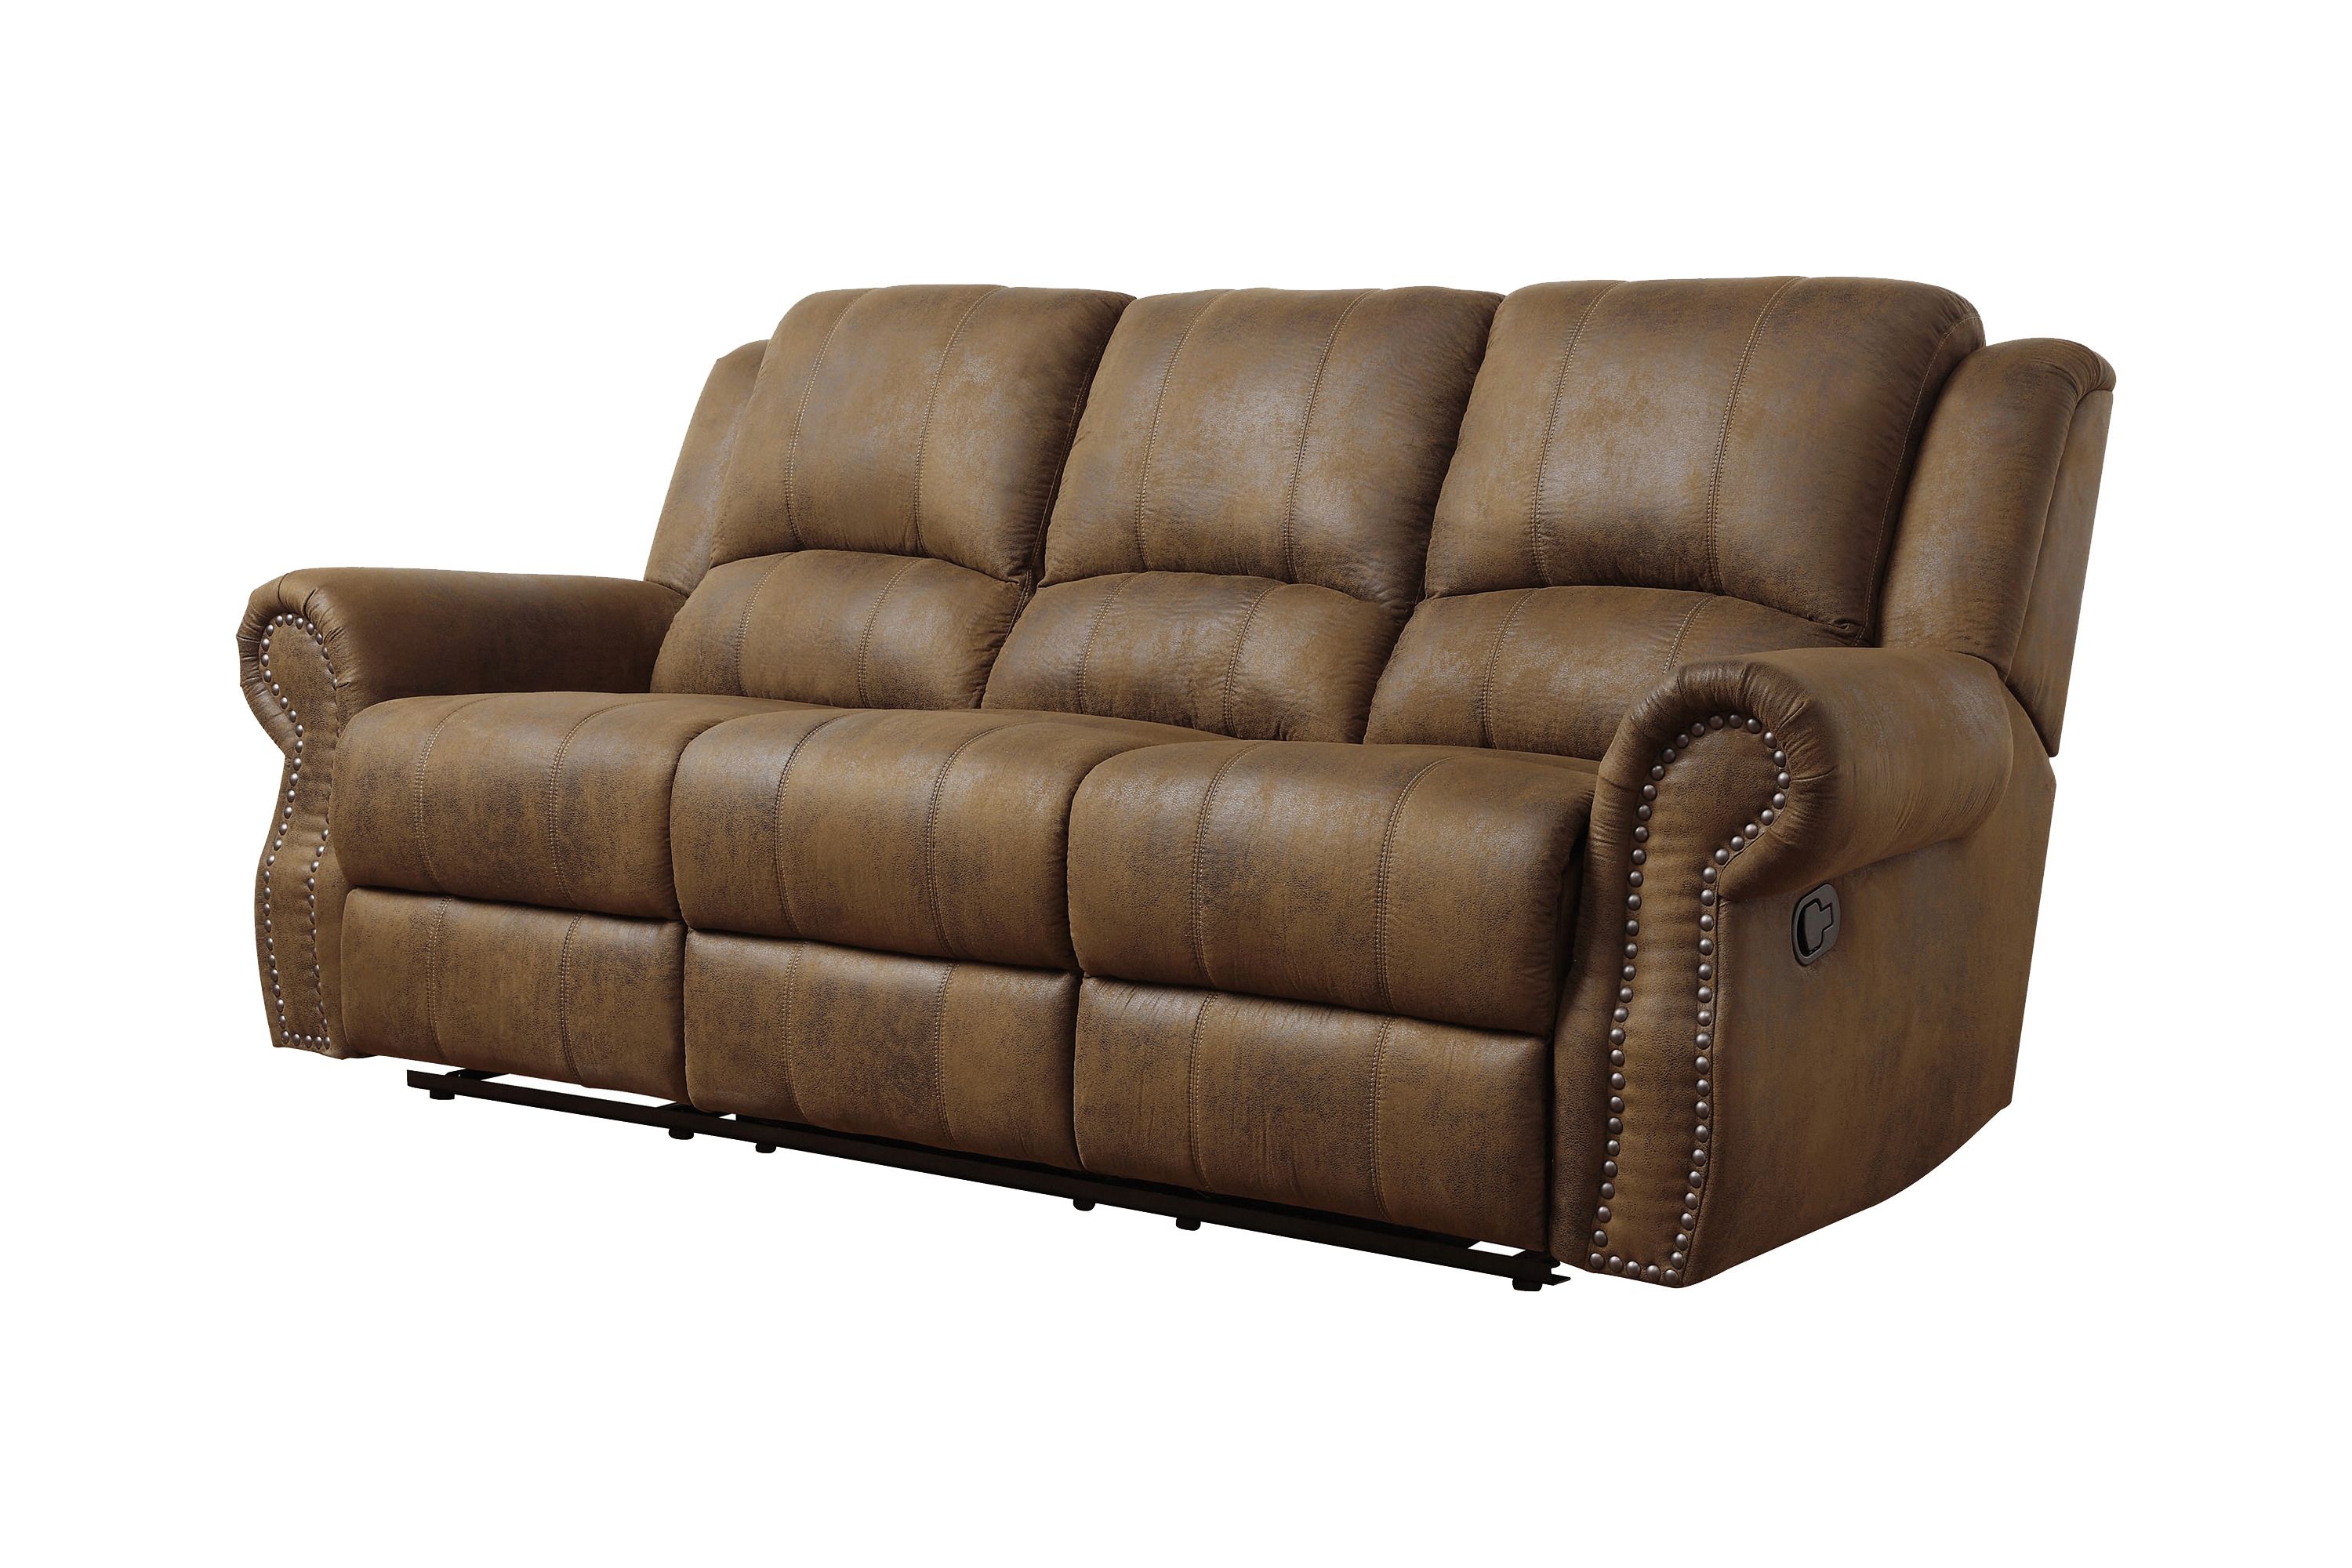 Sir Rawlinson Rolled Arm Motion Sofa With Nailhead Trim Buck Pertaining To Sofas With Nailhead Trim (Gallery 20 of 20)